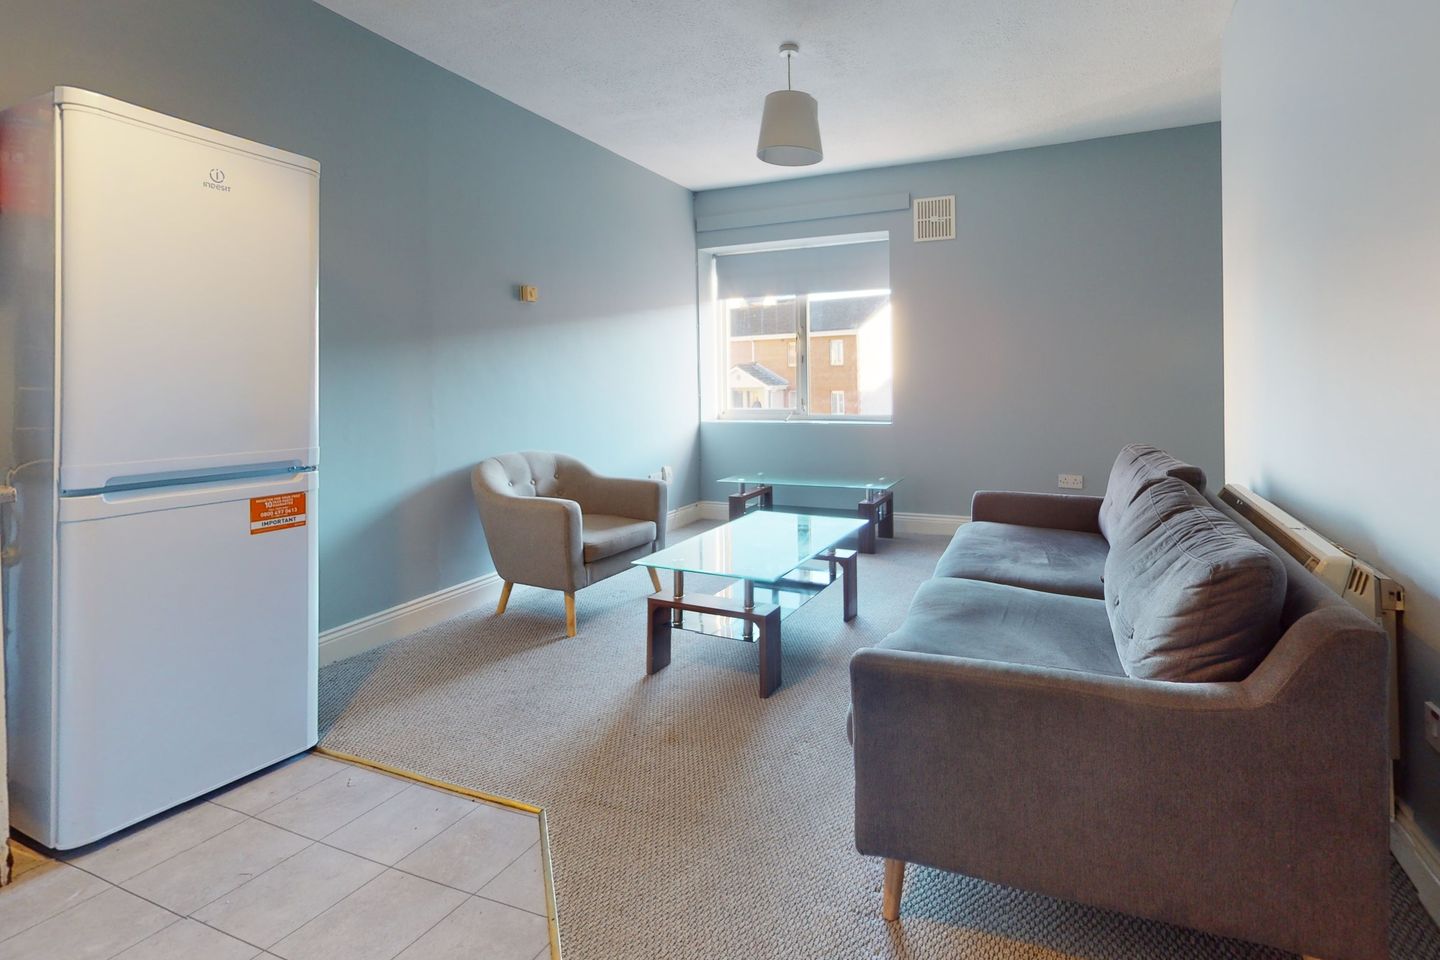 Apartment 8, Neptune House, Waterford City, Co. Waterford, X91X564